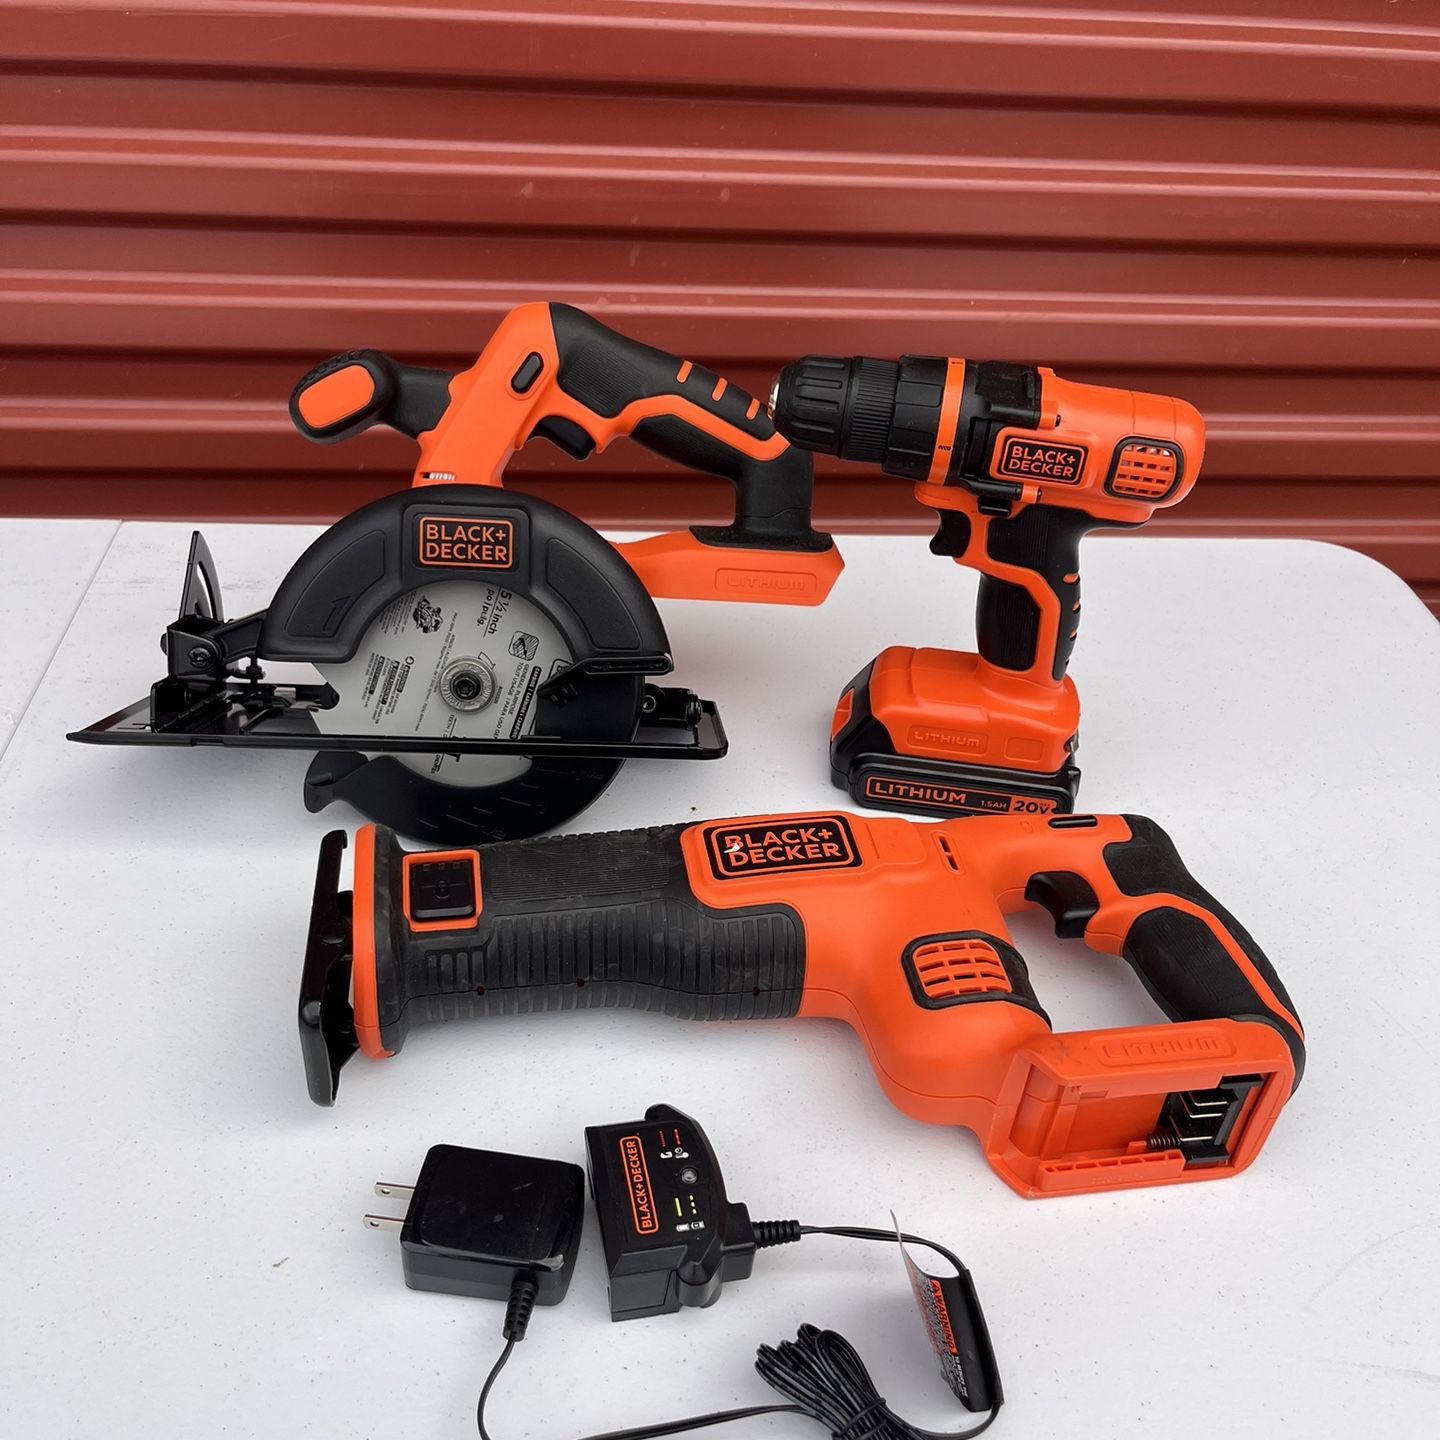 BLACK+DECKER 20V MAX Lithium-Ion Cordless Drill/Driver and Circular Saw And  Sawzall 3 Tool Combo Kit with 1.5Ah Battery and Charger for Sale in  Carrollton, TX - OfferUp